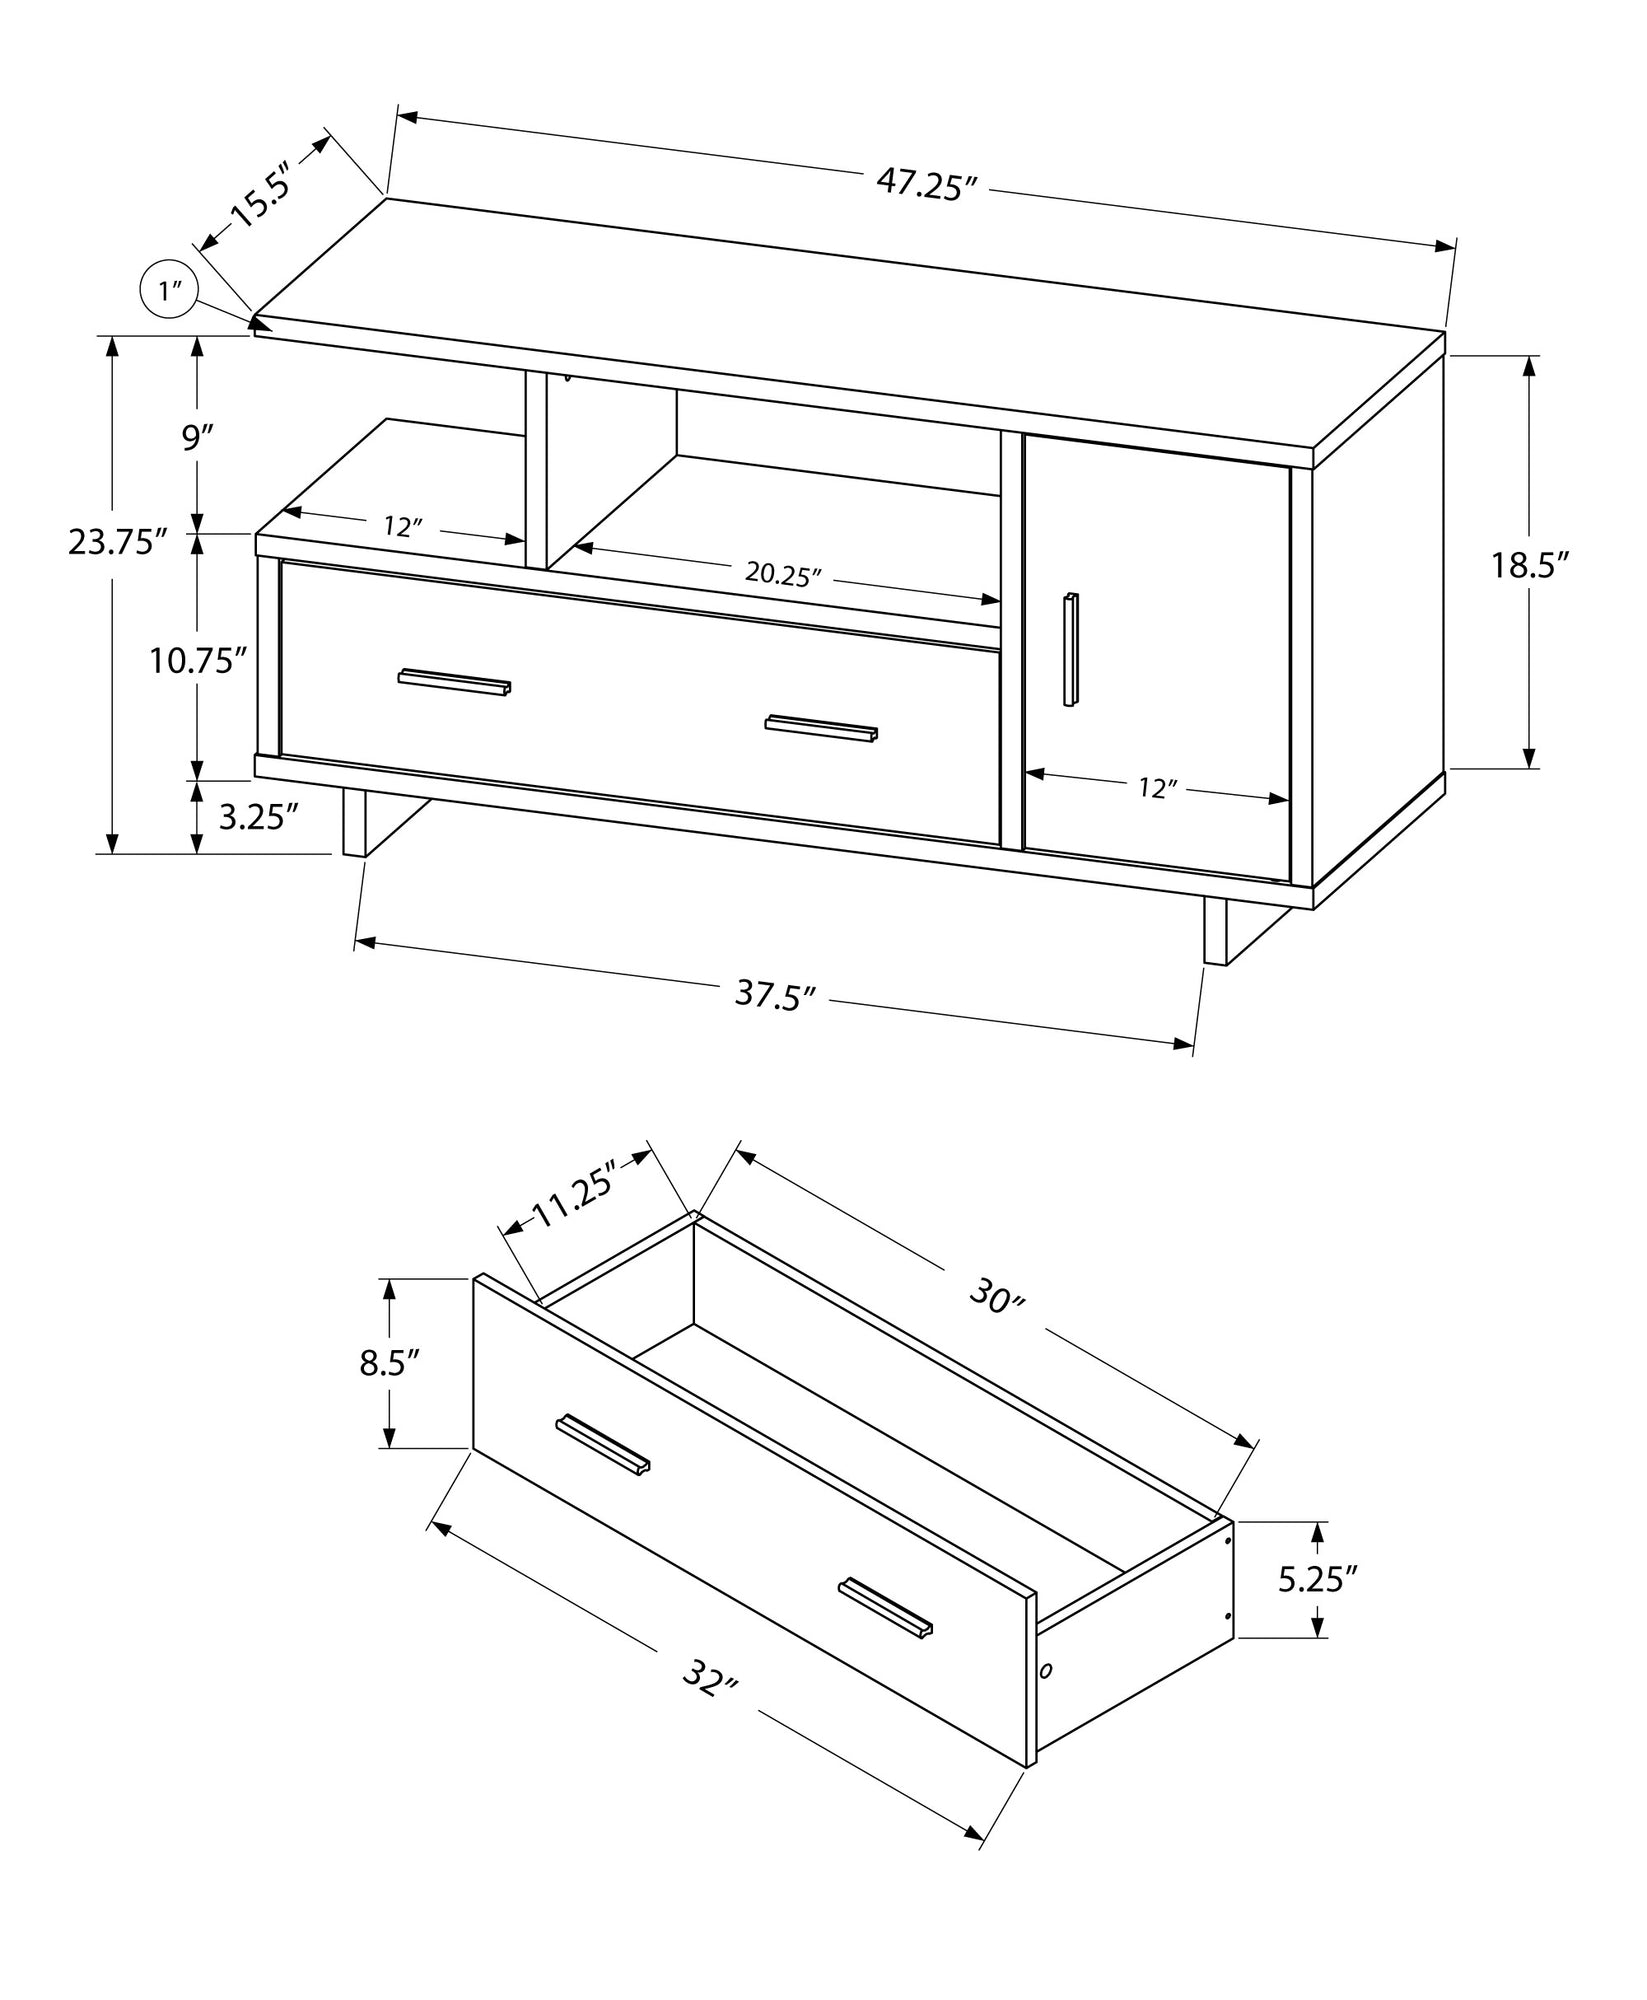 15.5" X 47.25" X 23.75" White Particle Board Hollow Core TV Stand With Storage